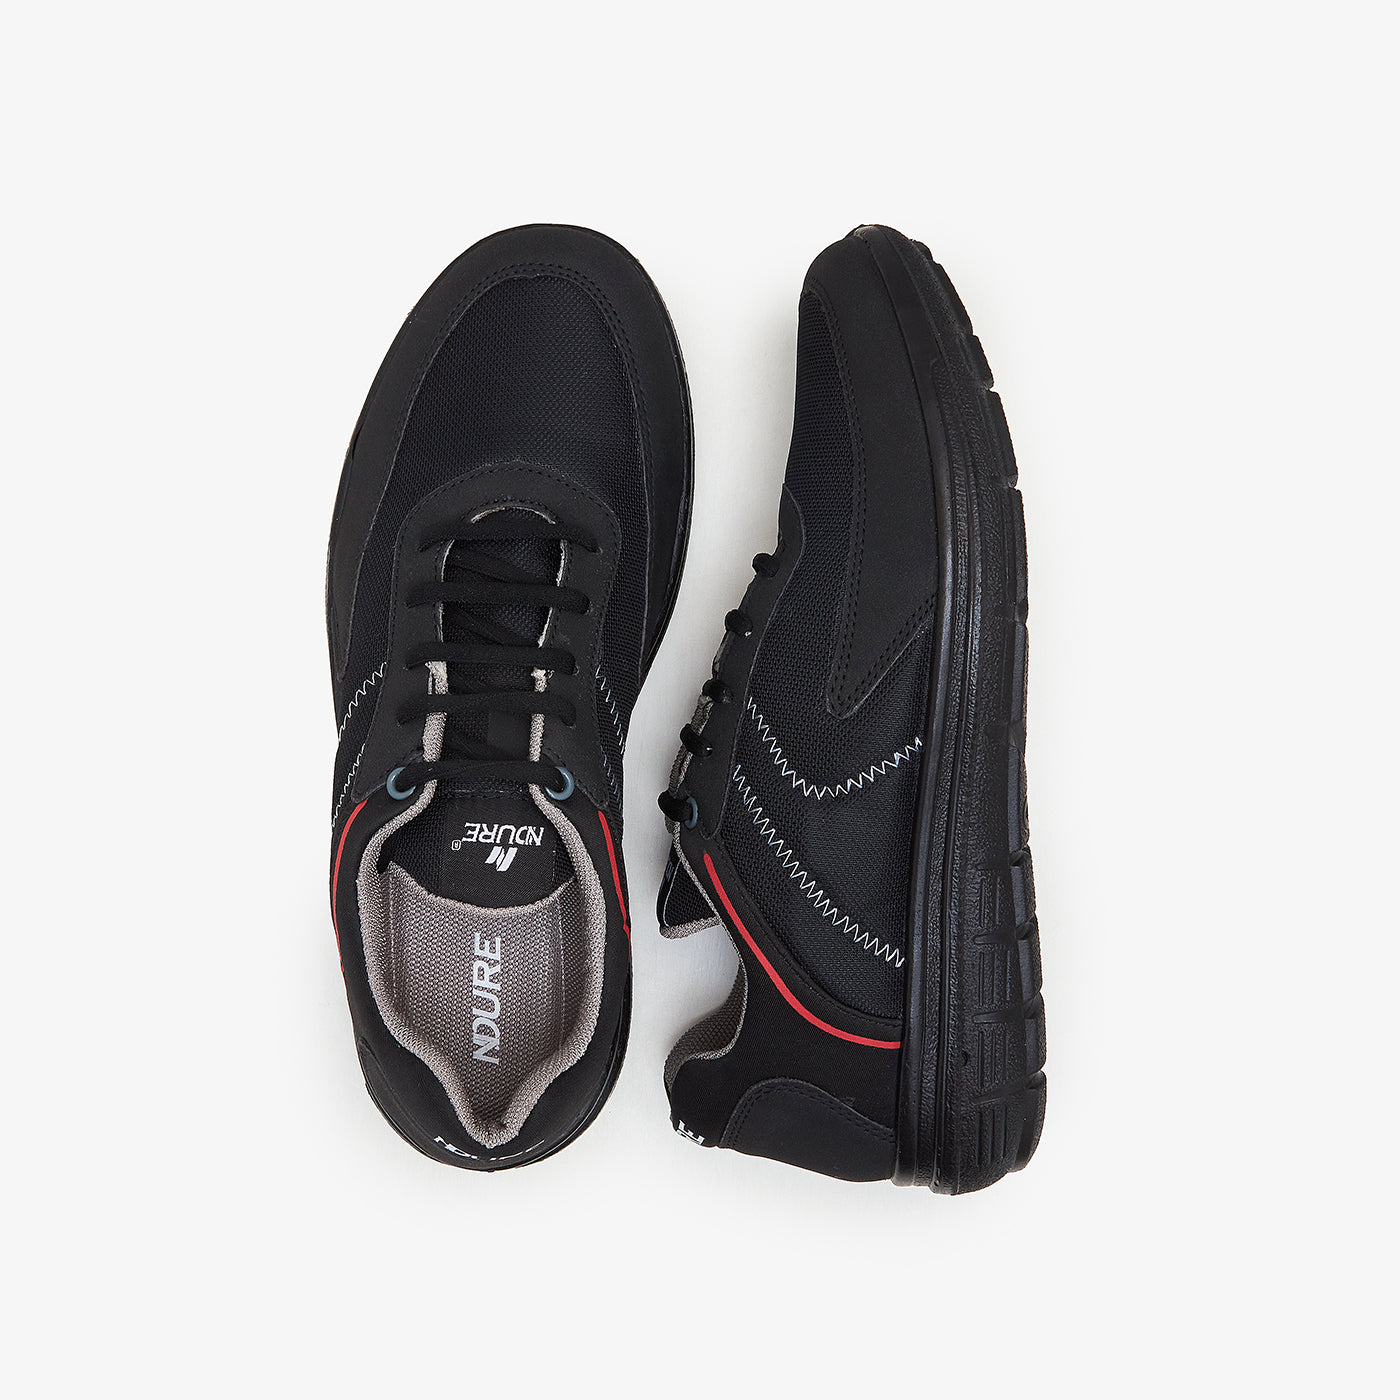 Men's Ultimate Running Shoes